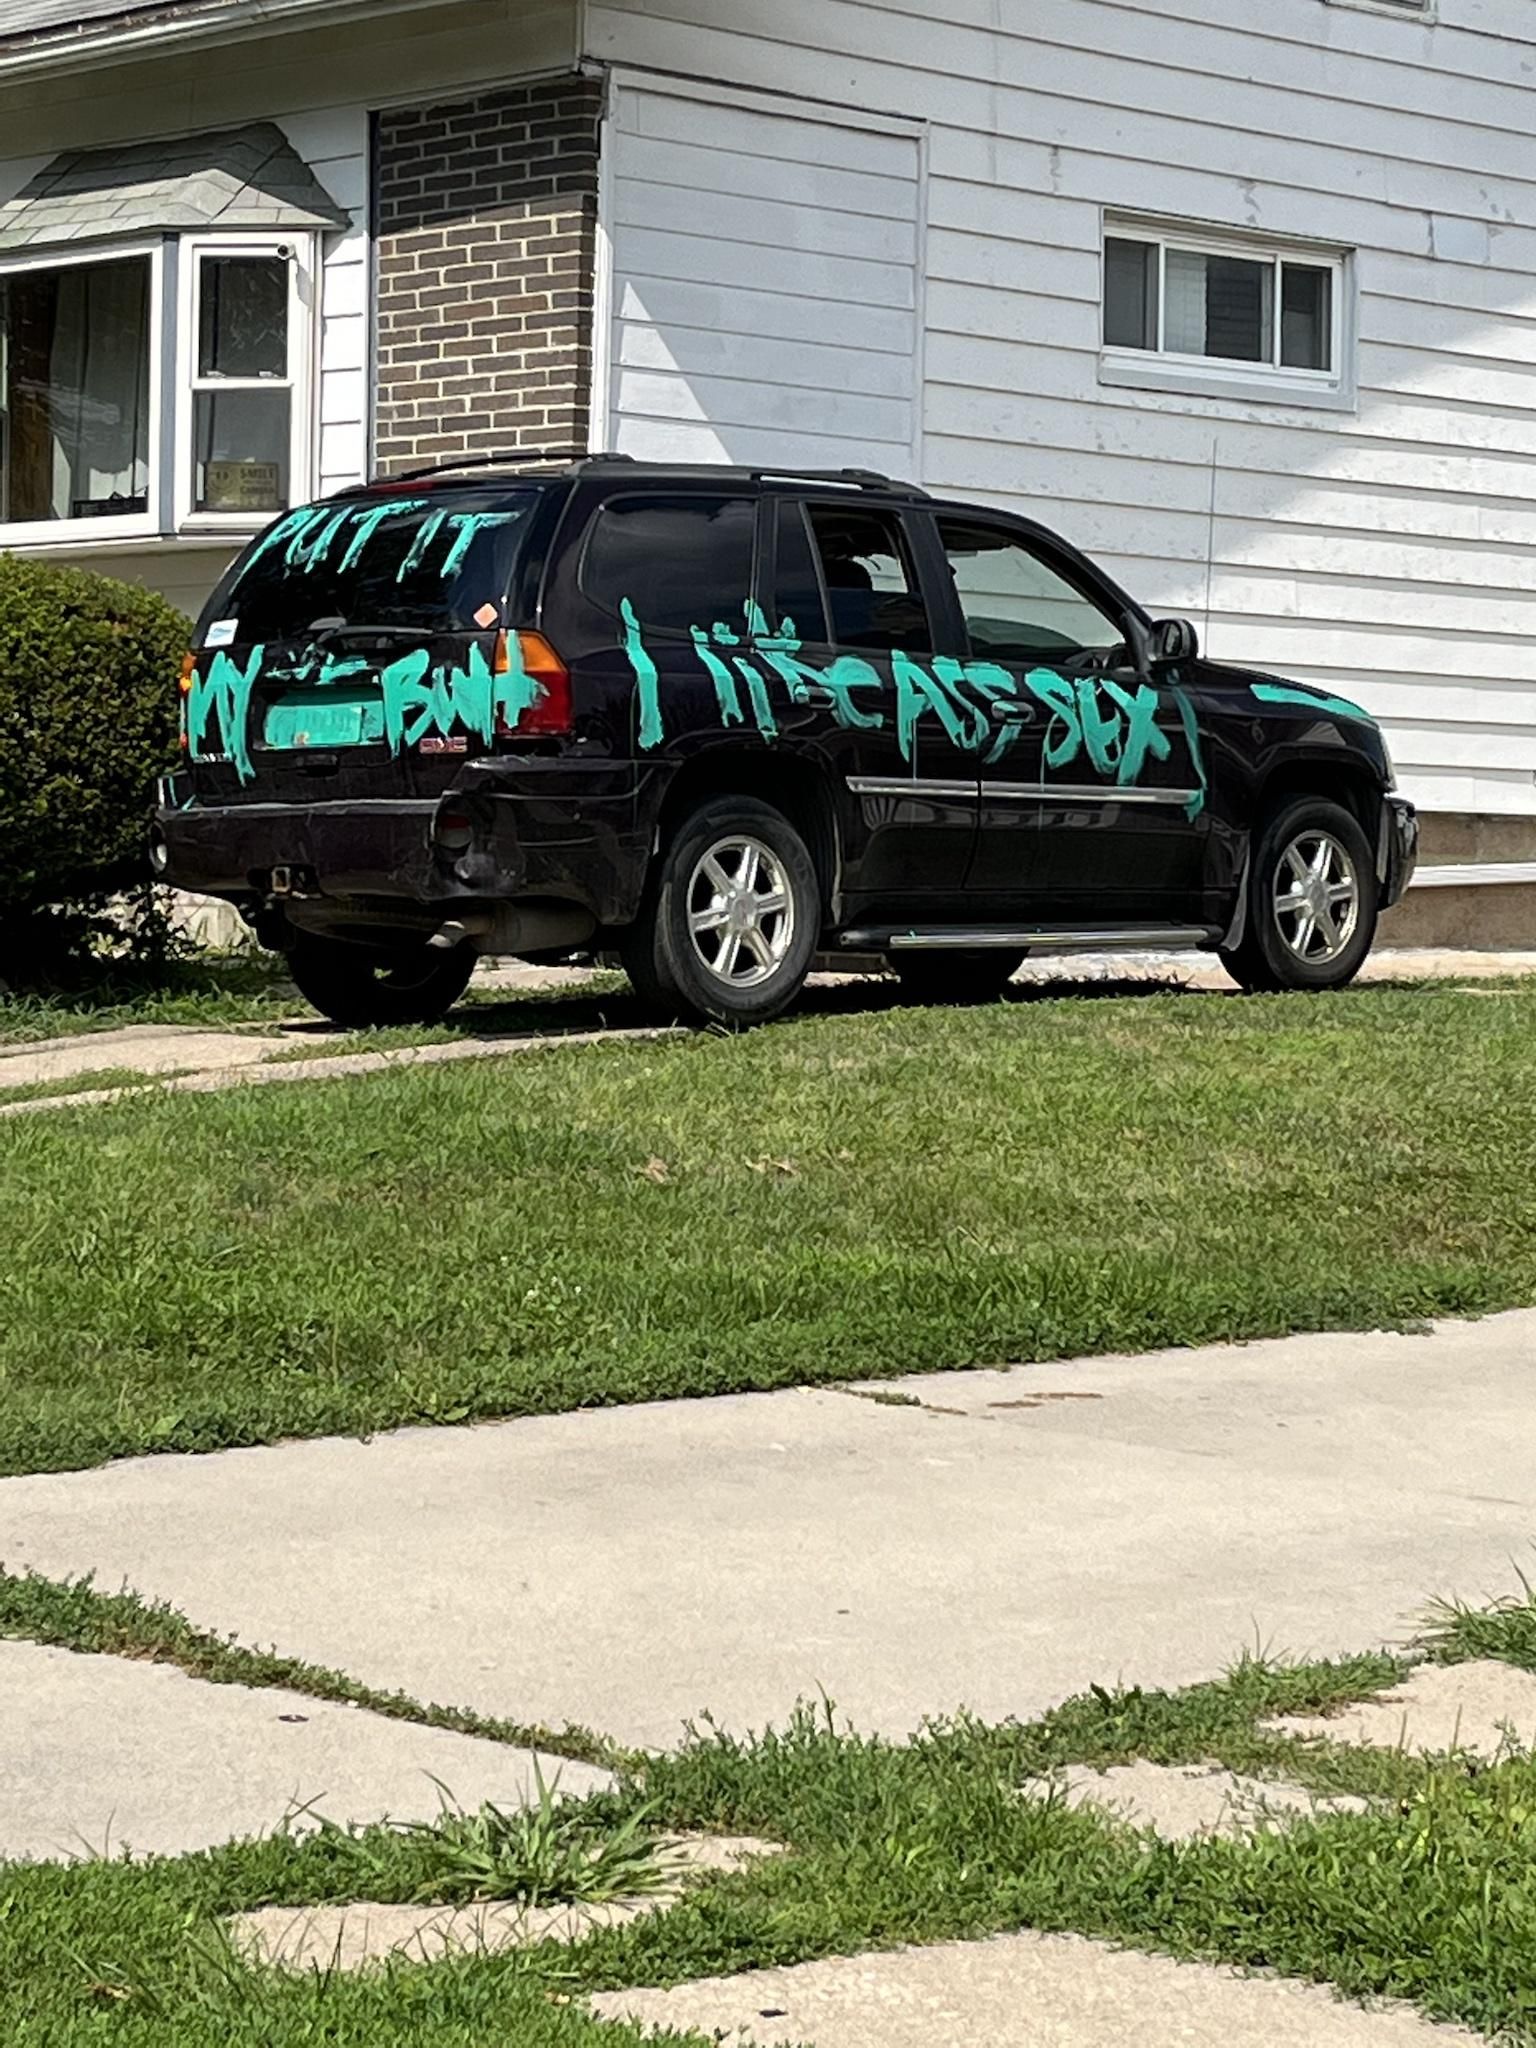 My in-law’s neighbor pissed someone off